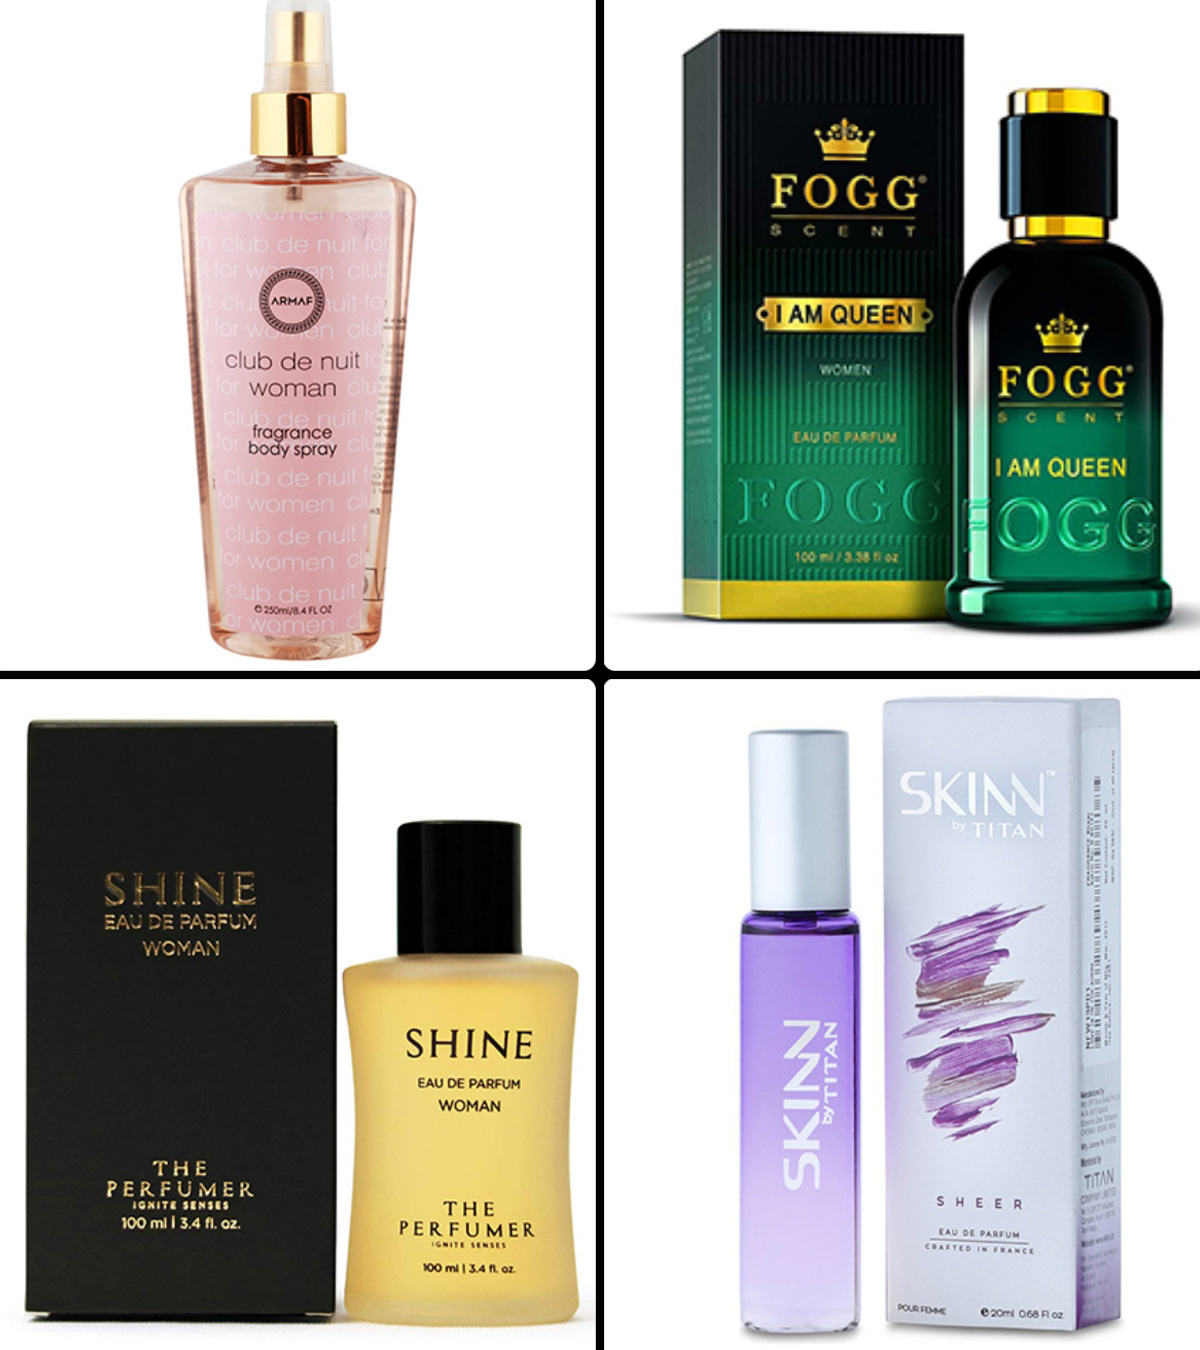 12 Best Long Lasting Perfumes For Women In Sri Lanka With Price 2021, Branded Perfumes